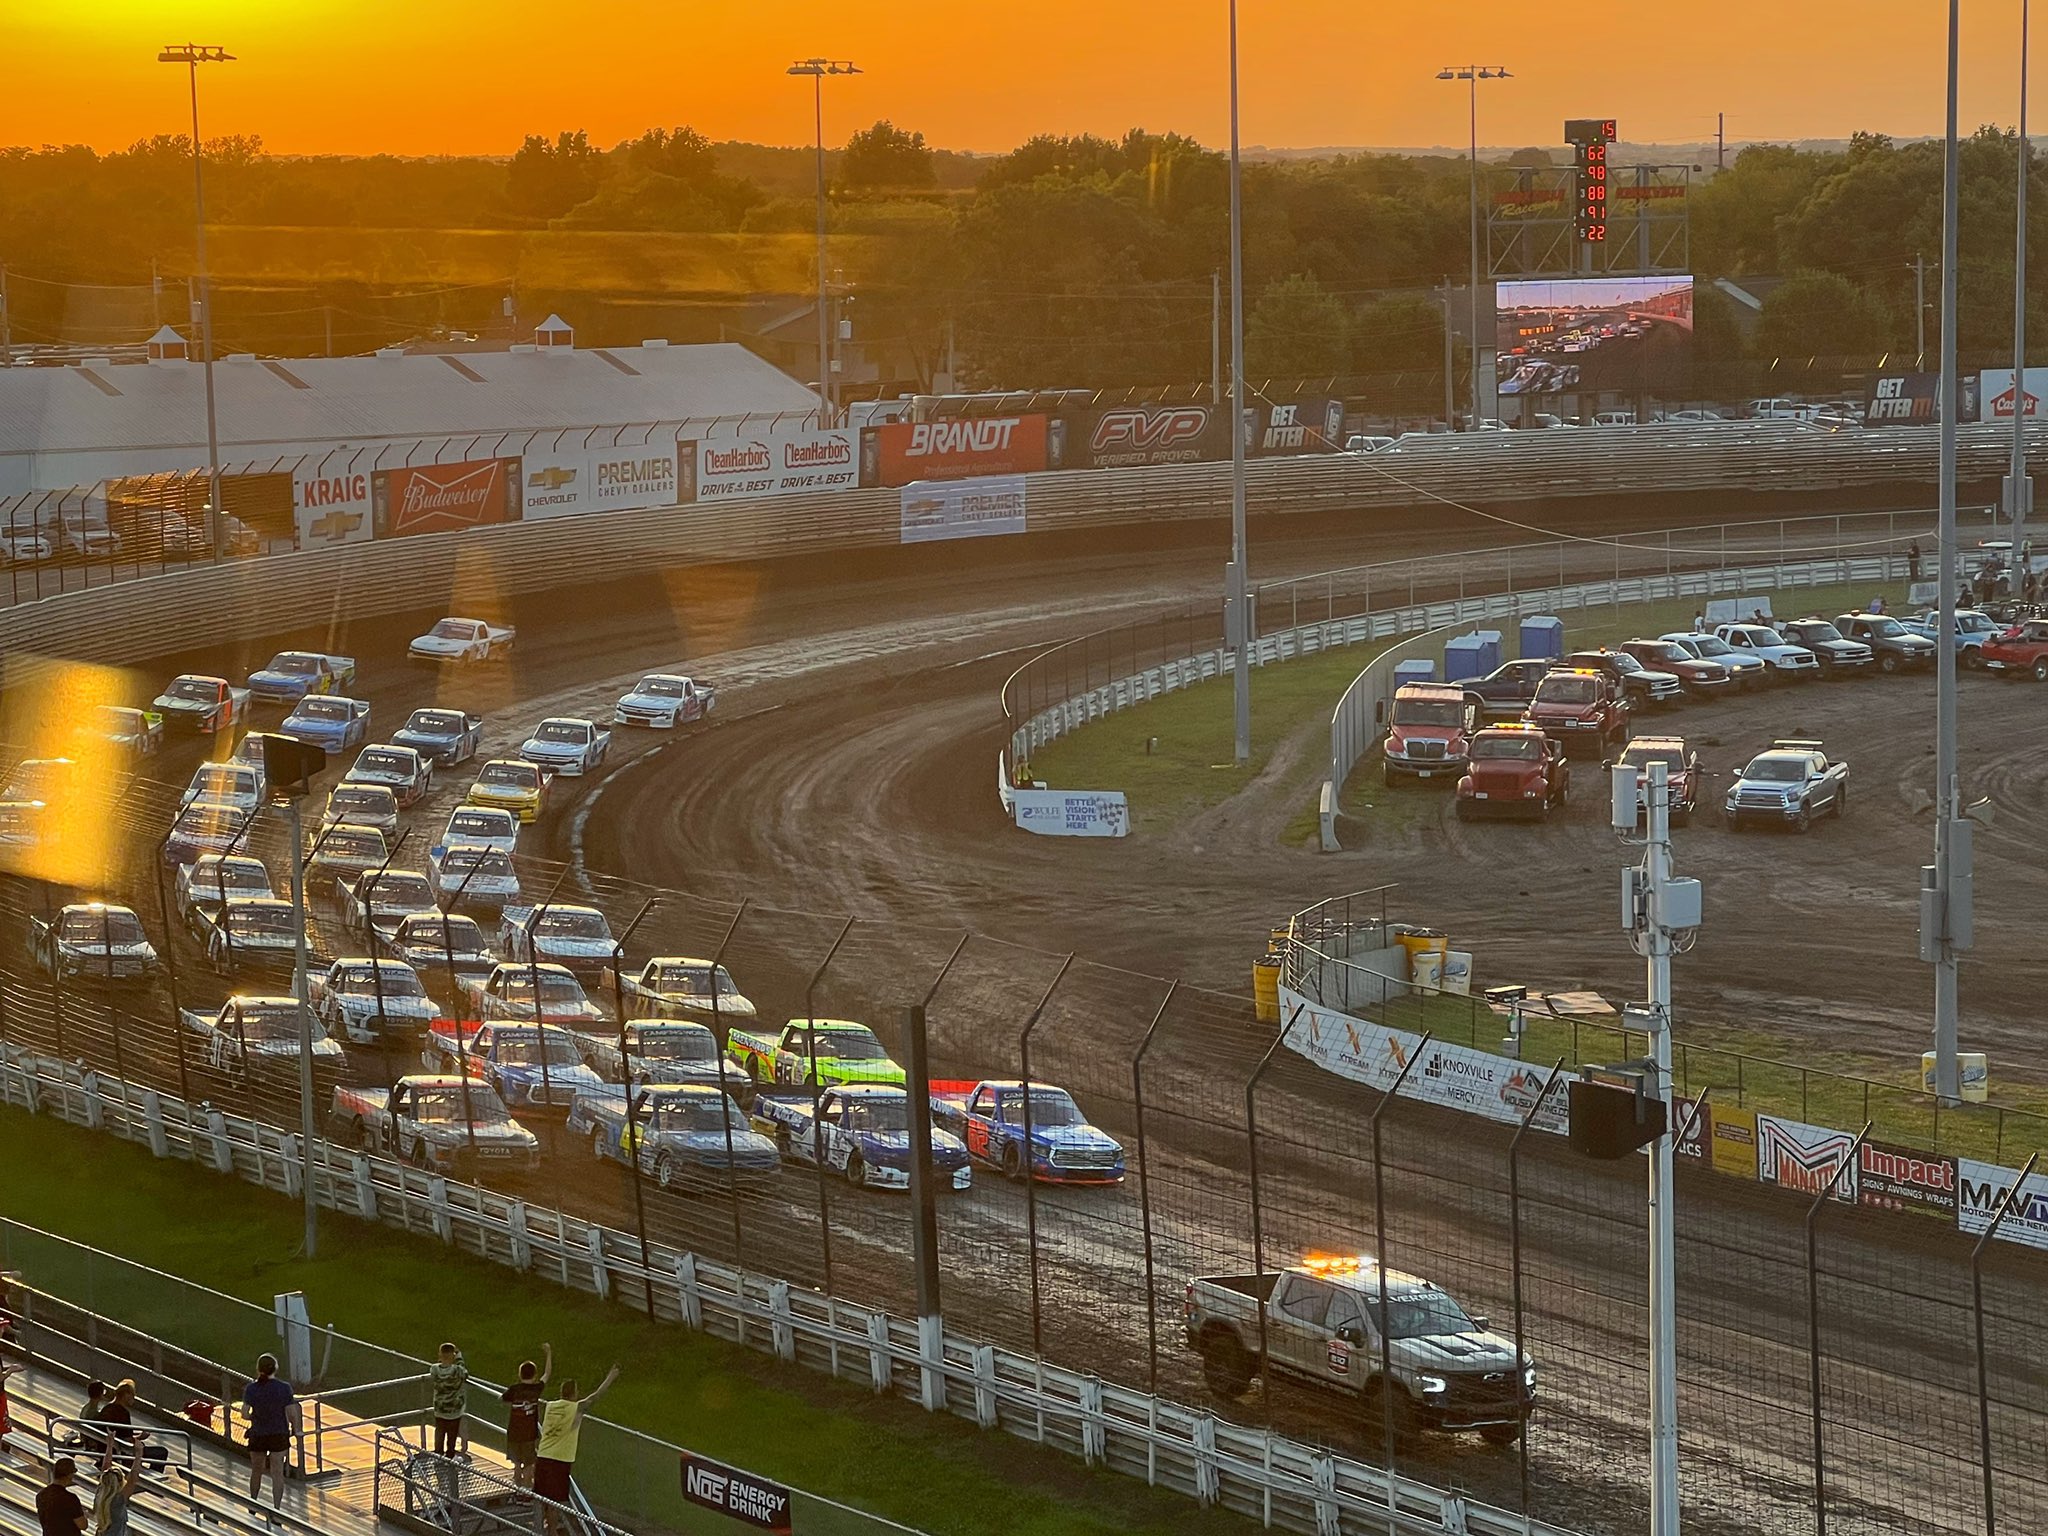 Knoxville Race Results: June 18, 2022 (NASCAR Truck Series)